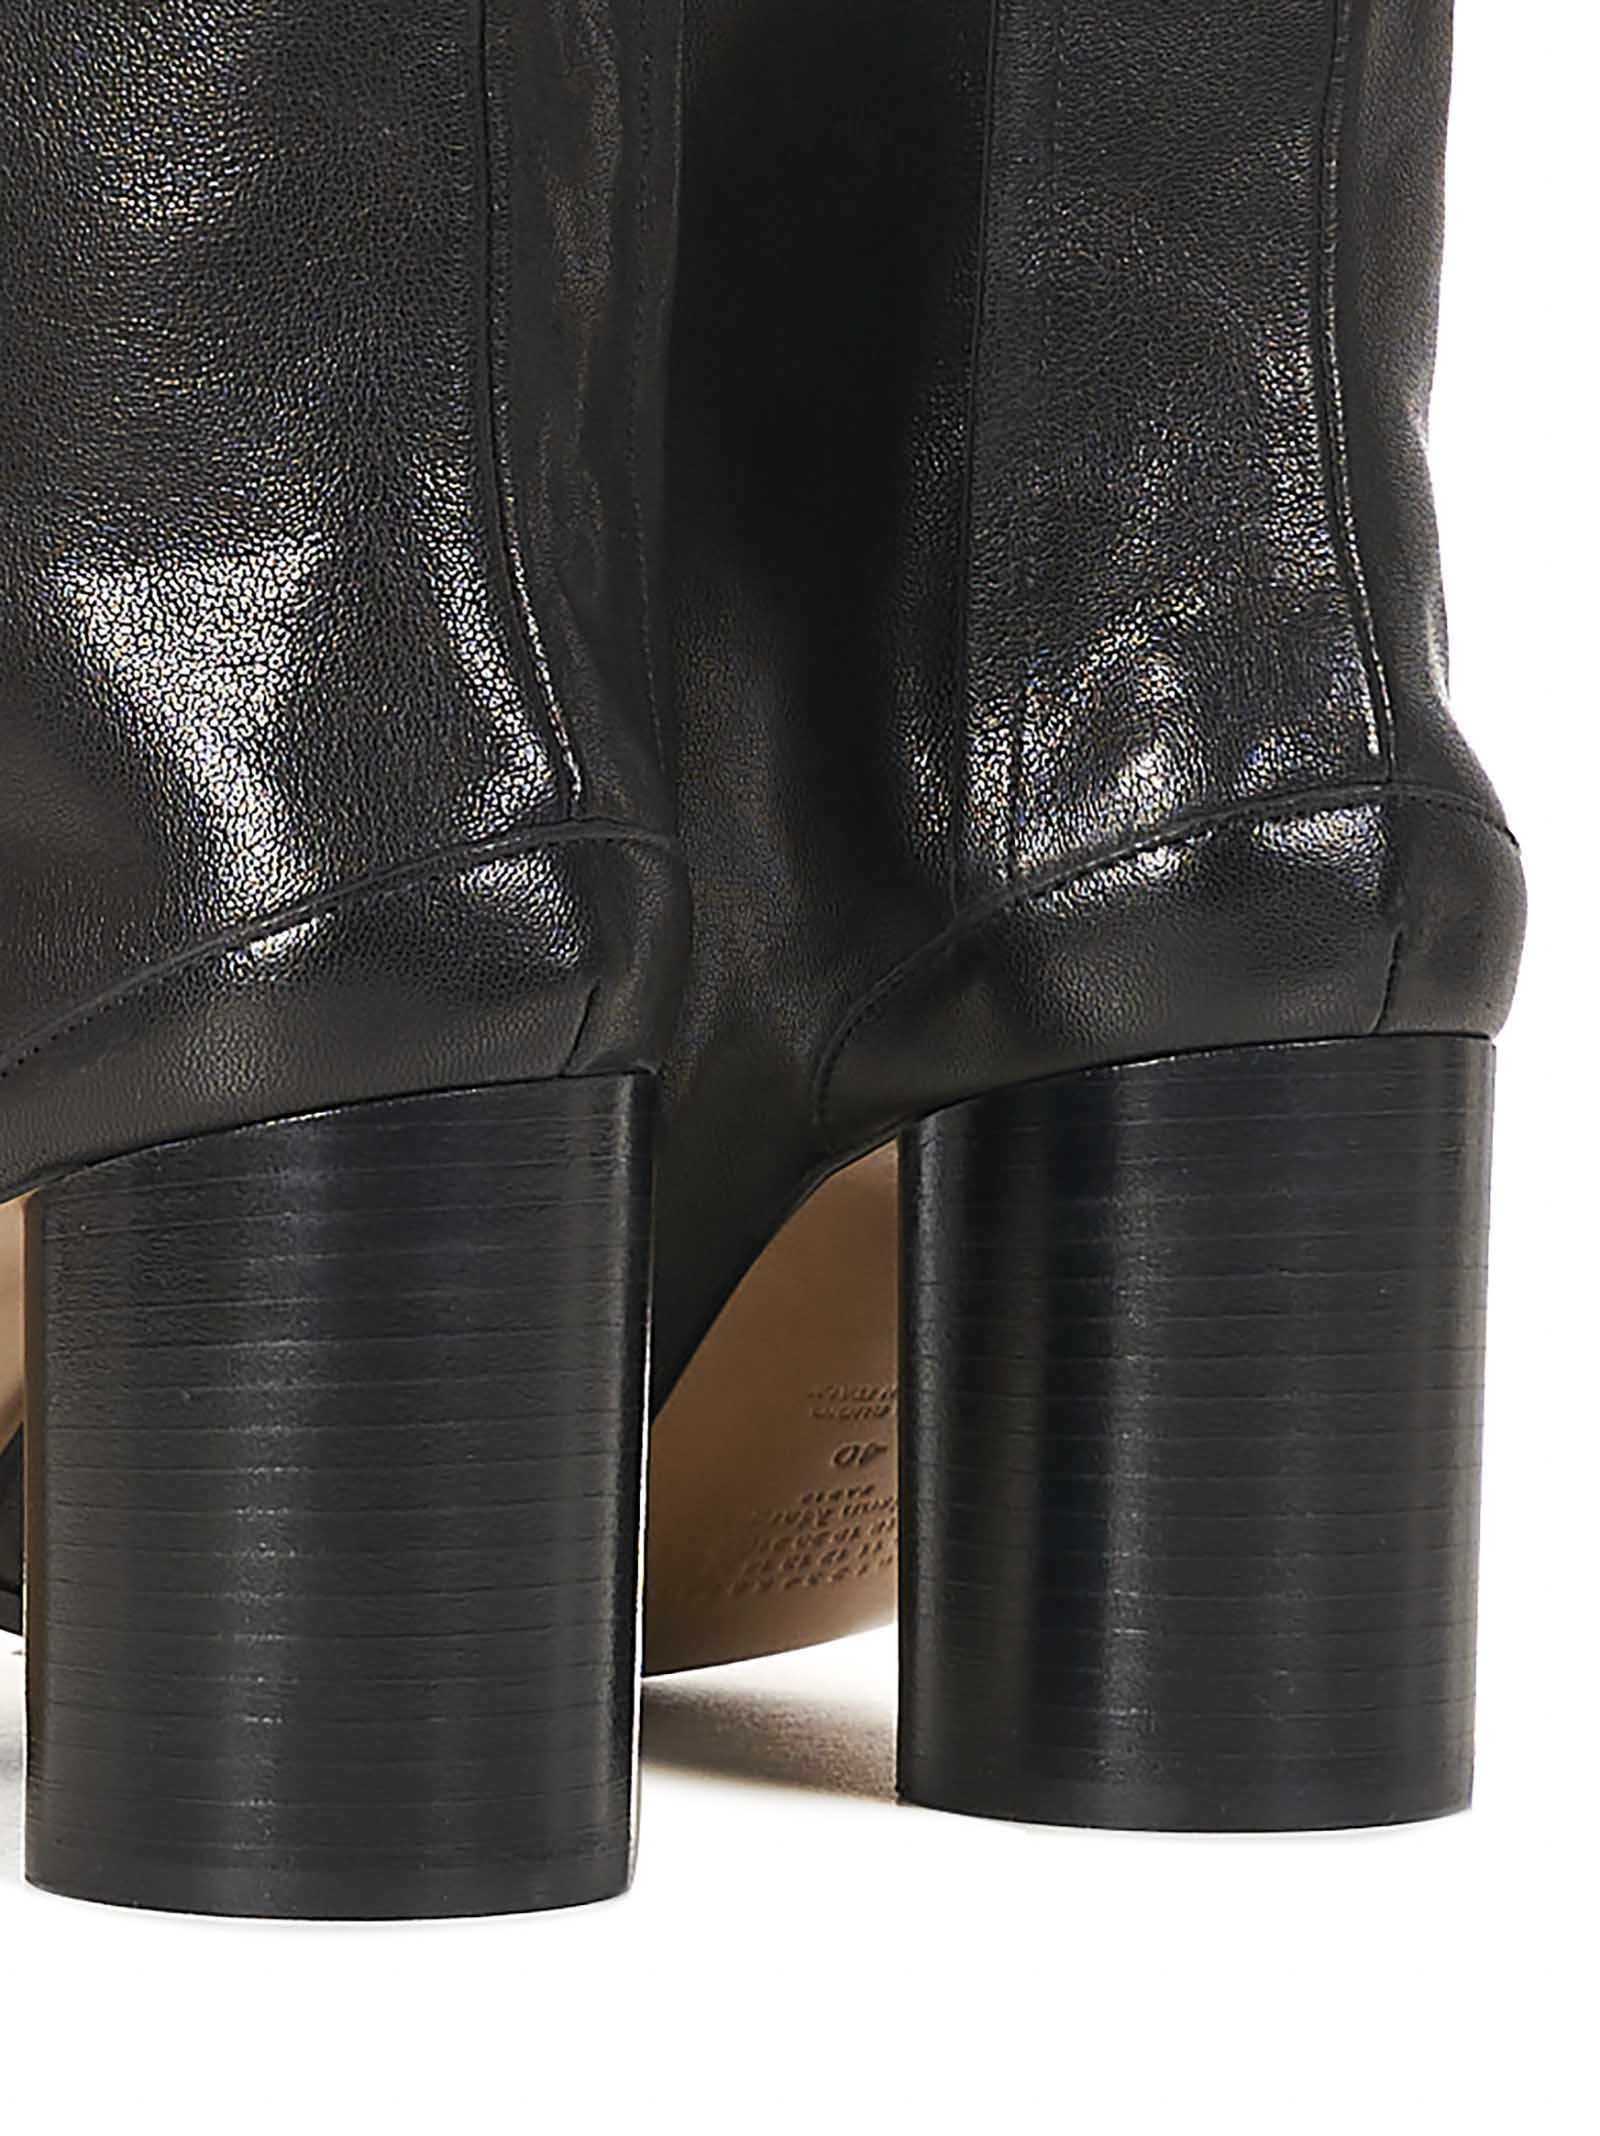 Black vintage leather ankle boots with Tabi split-toe and cylindrical heel. - 4